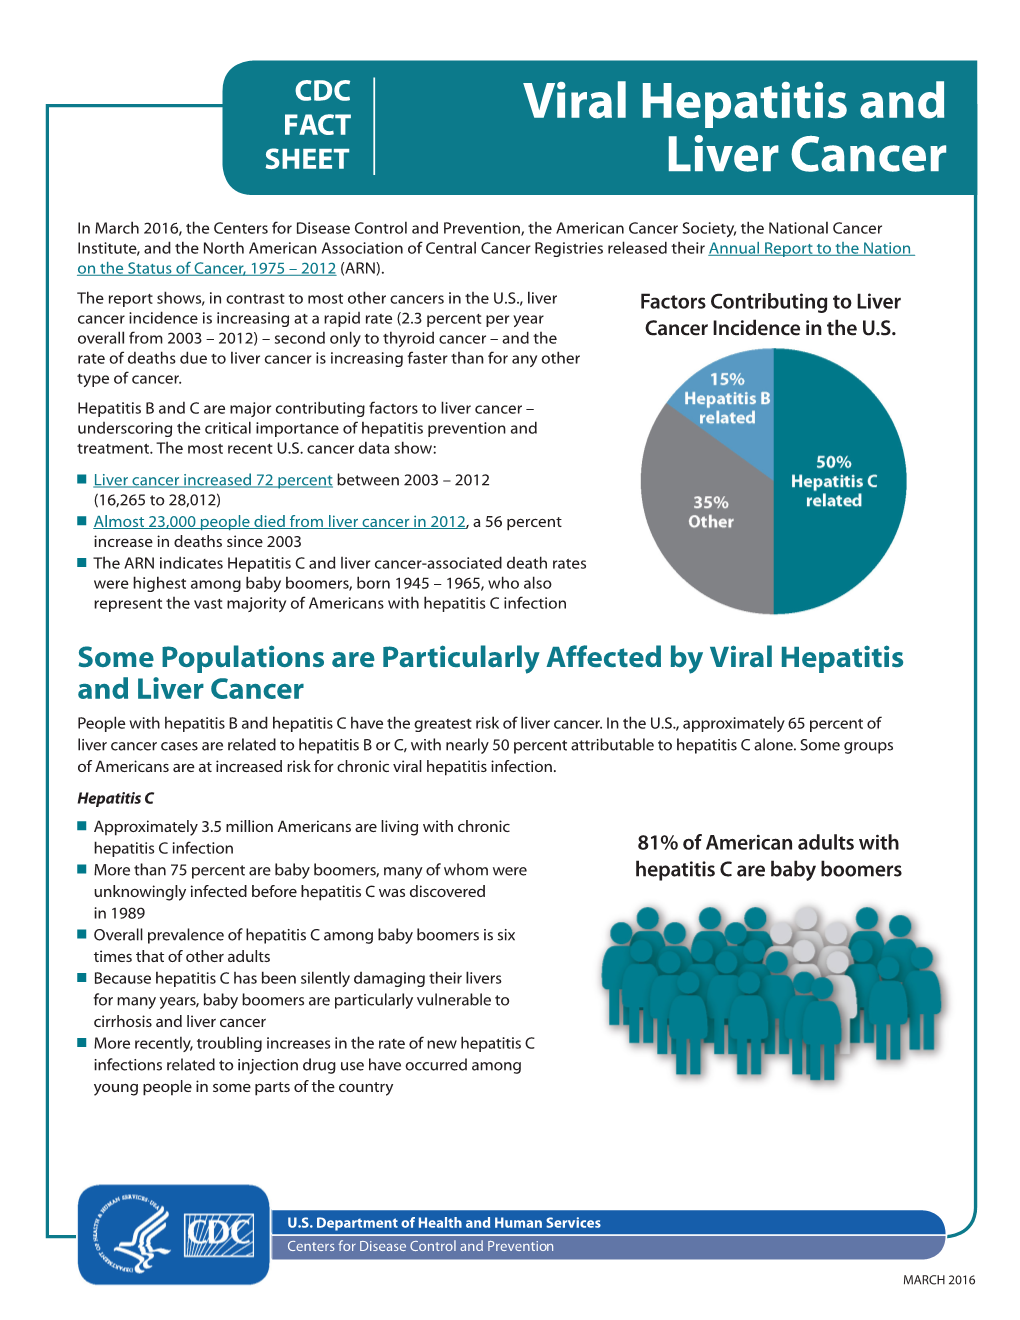 Viral Hepatitis and Liver Cancer People with Hepatitis B and Hepatitis C Have the Greatest Risk of Liver Cancer